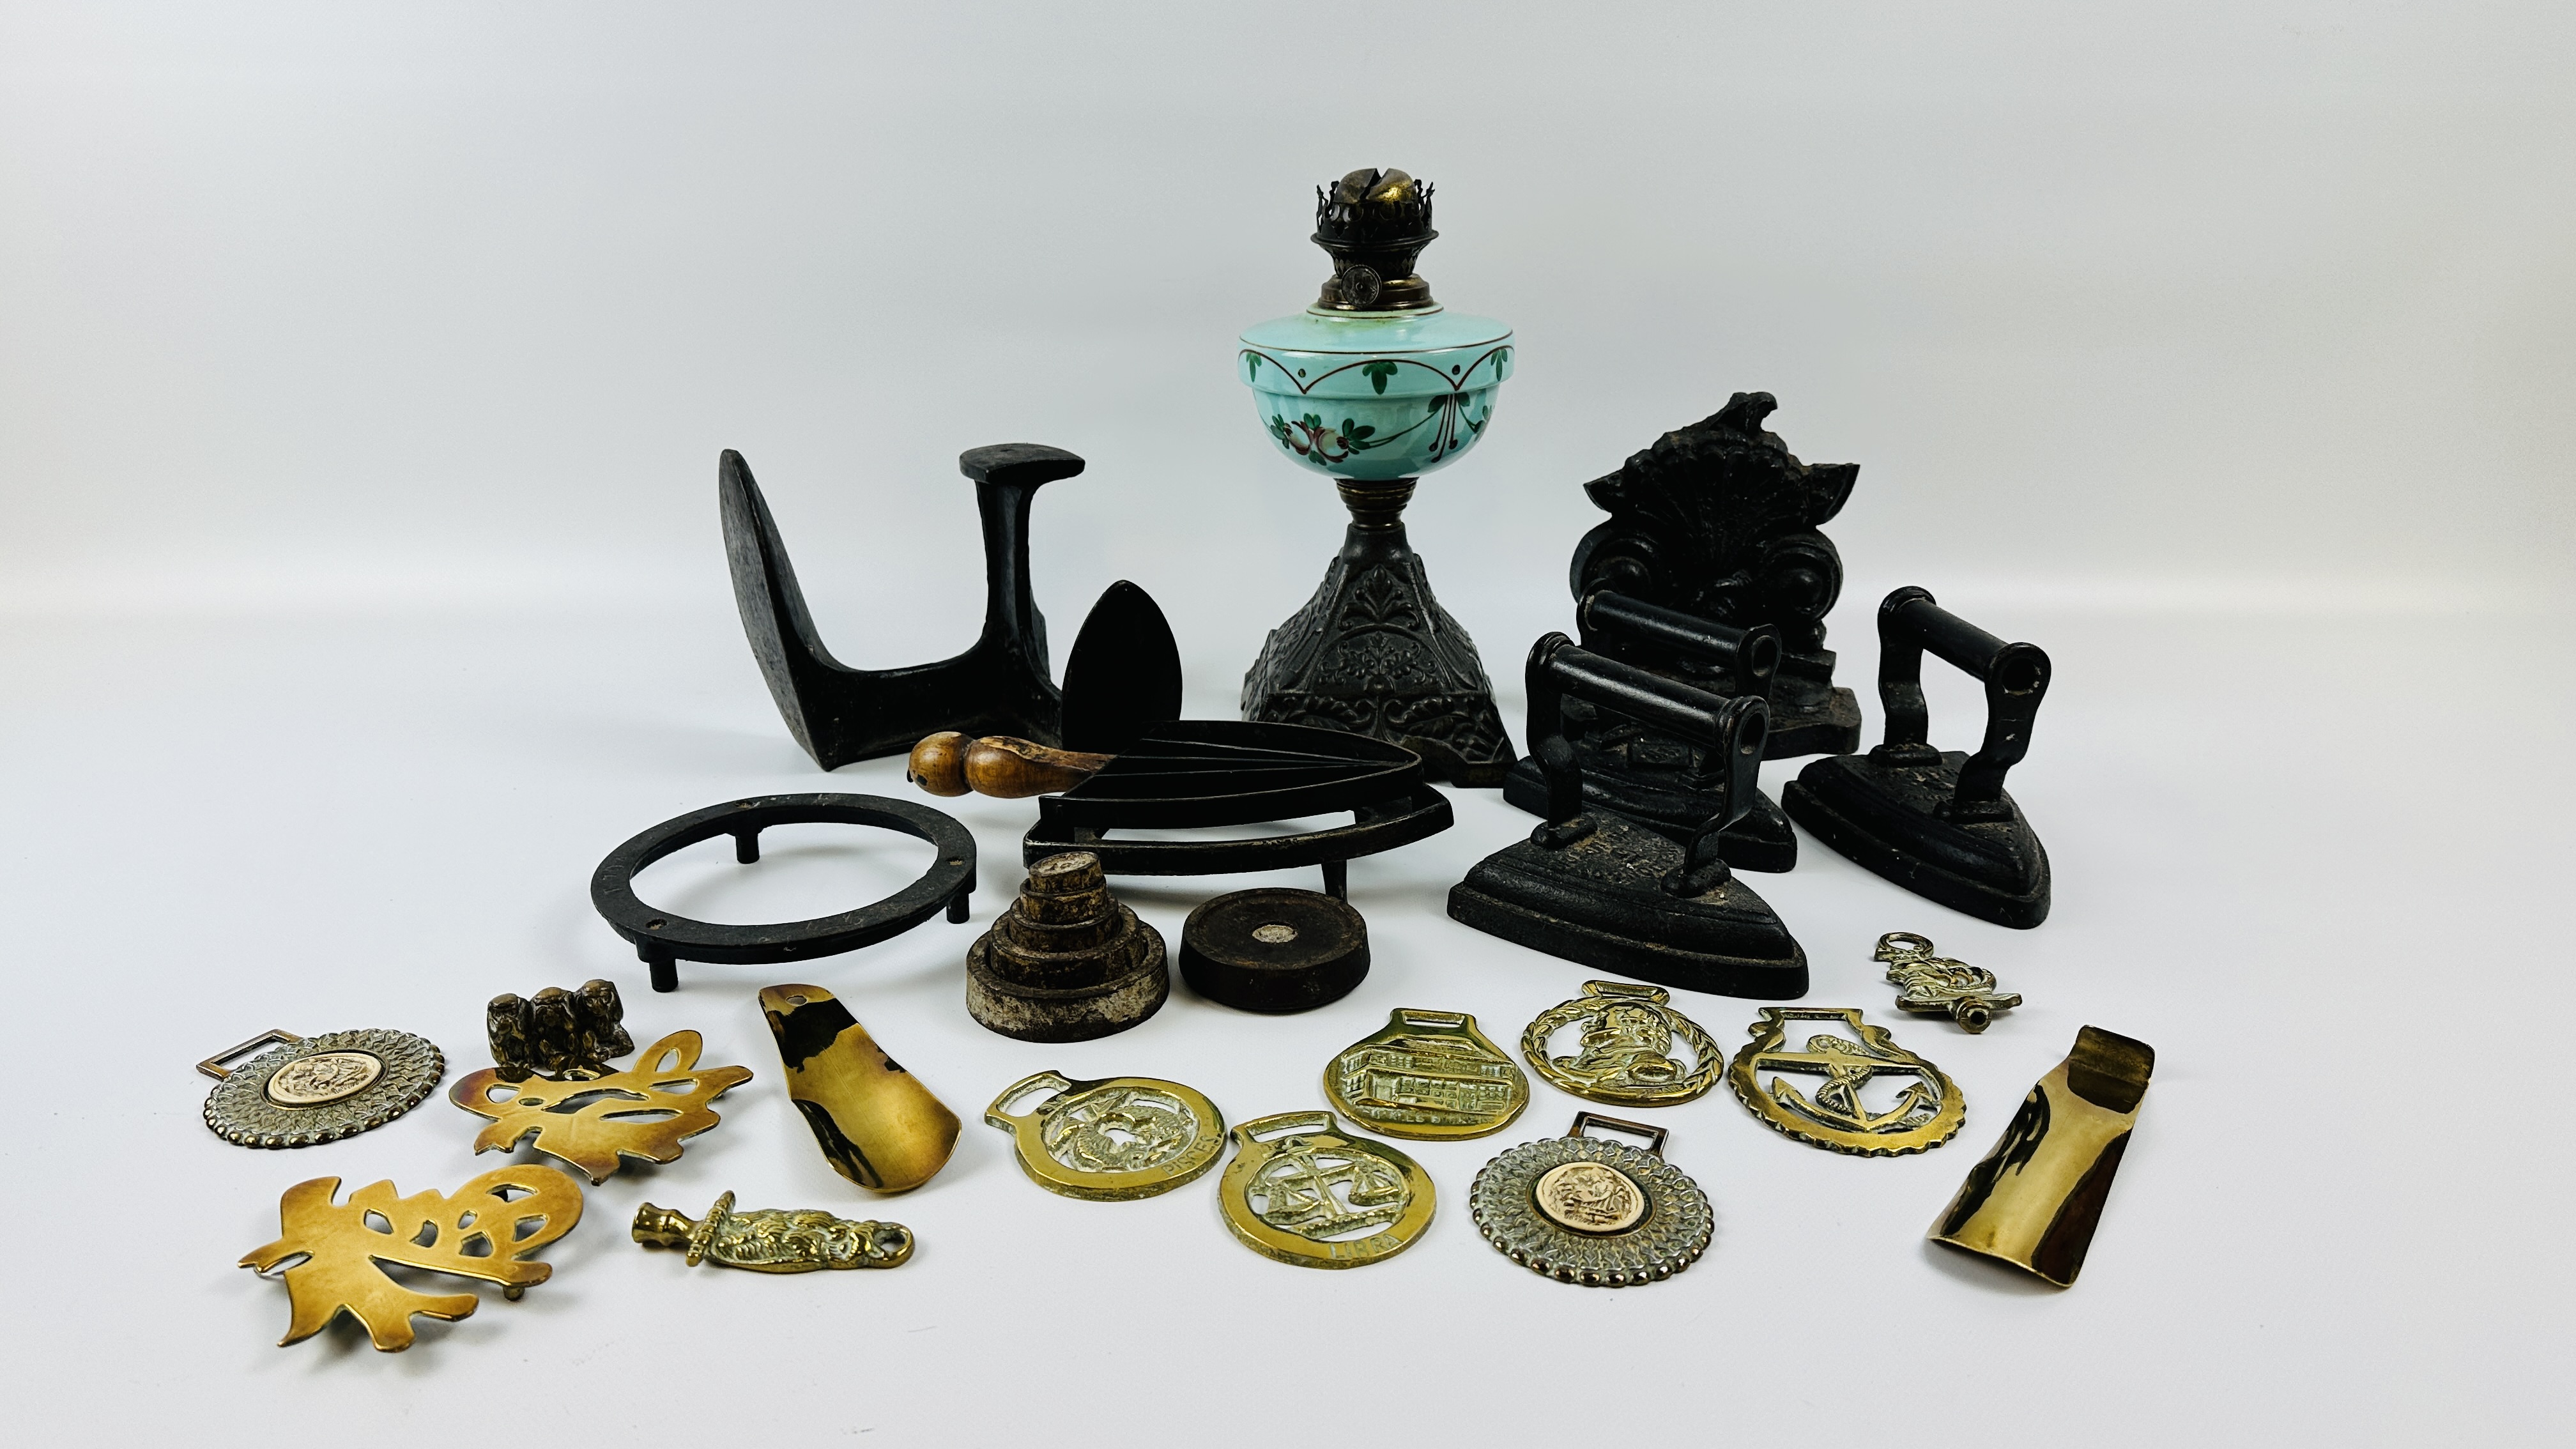 COLLECTION OF VINTAGE METAL WARE ITEMS TO INCLUDE 3 CAST IRONS, WEIGHTS, SHOE LAST,